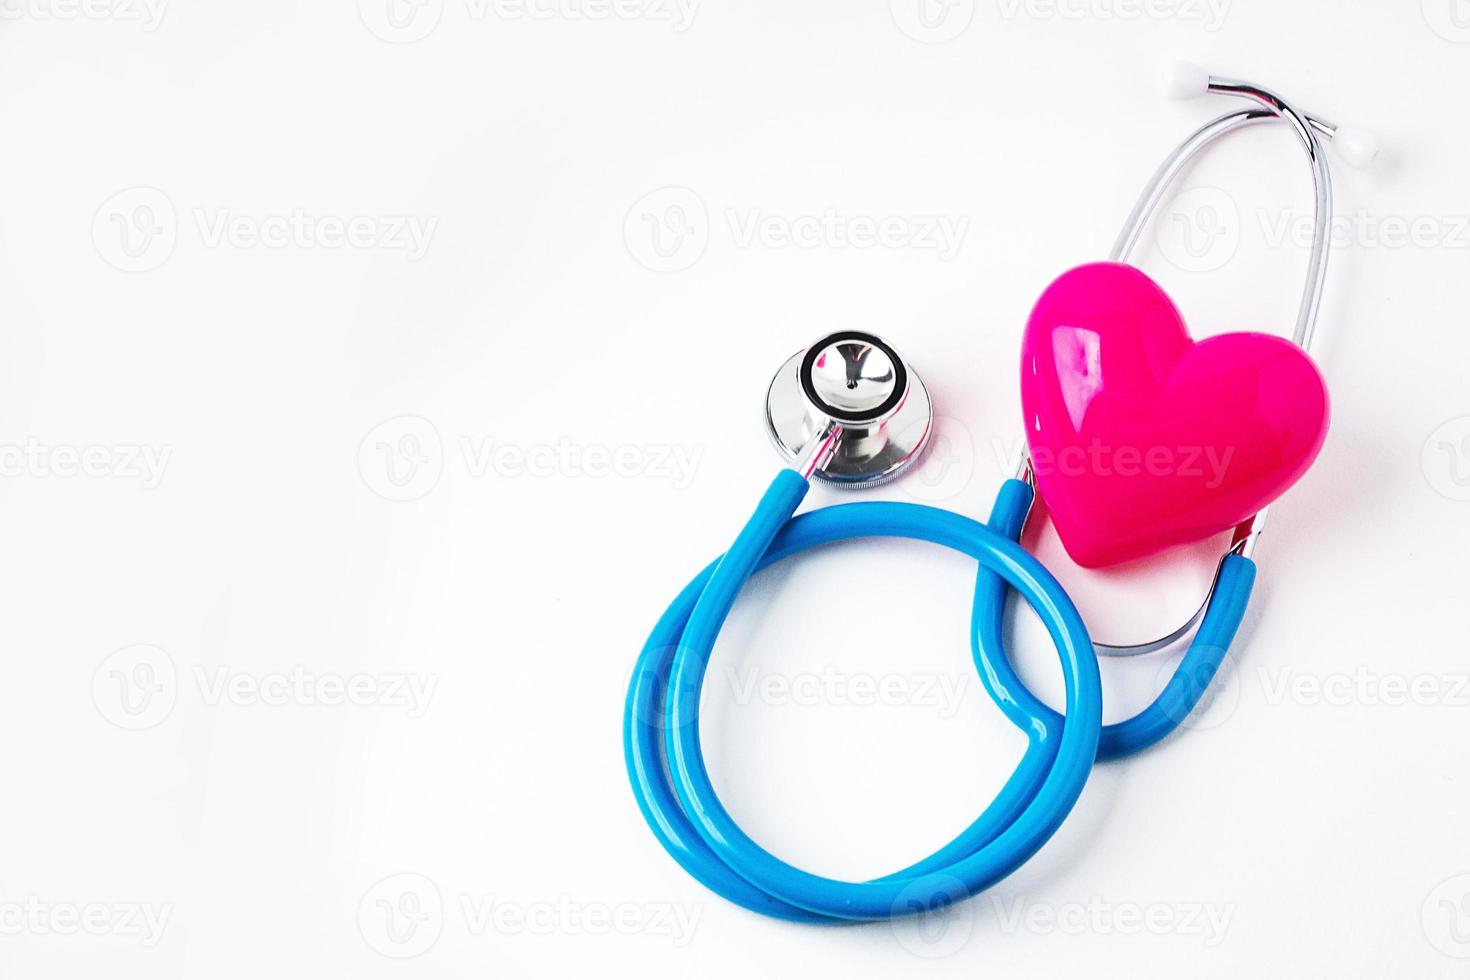 The Heart and stethoscope  background close up image. photo